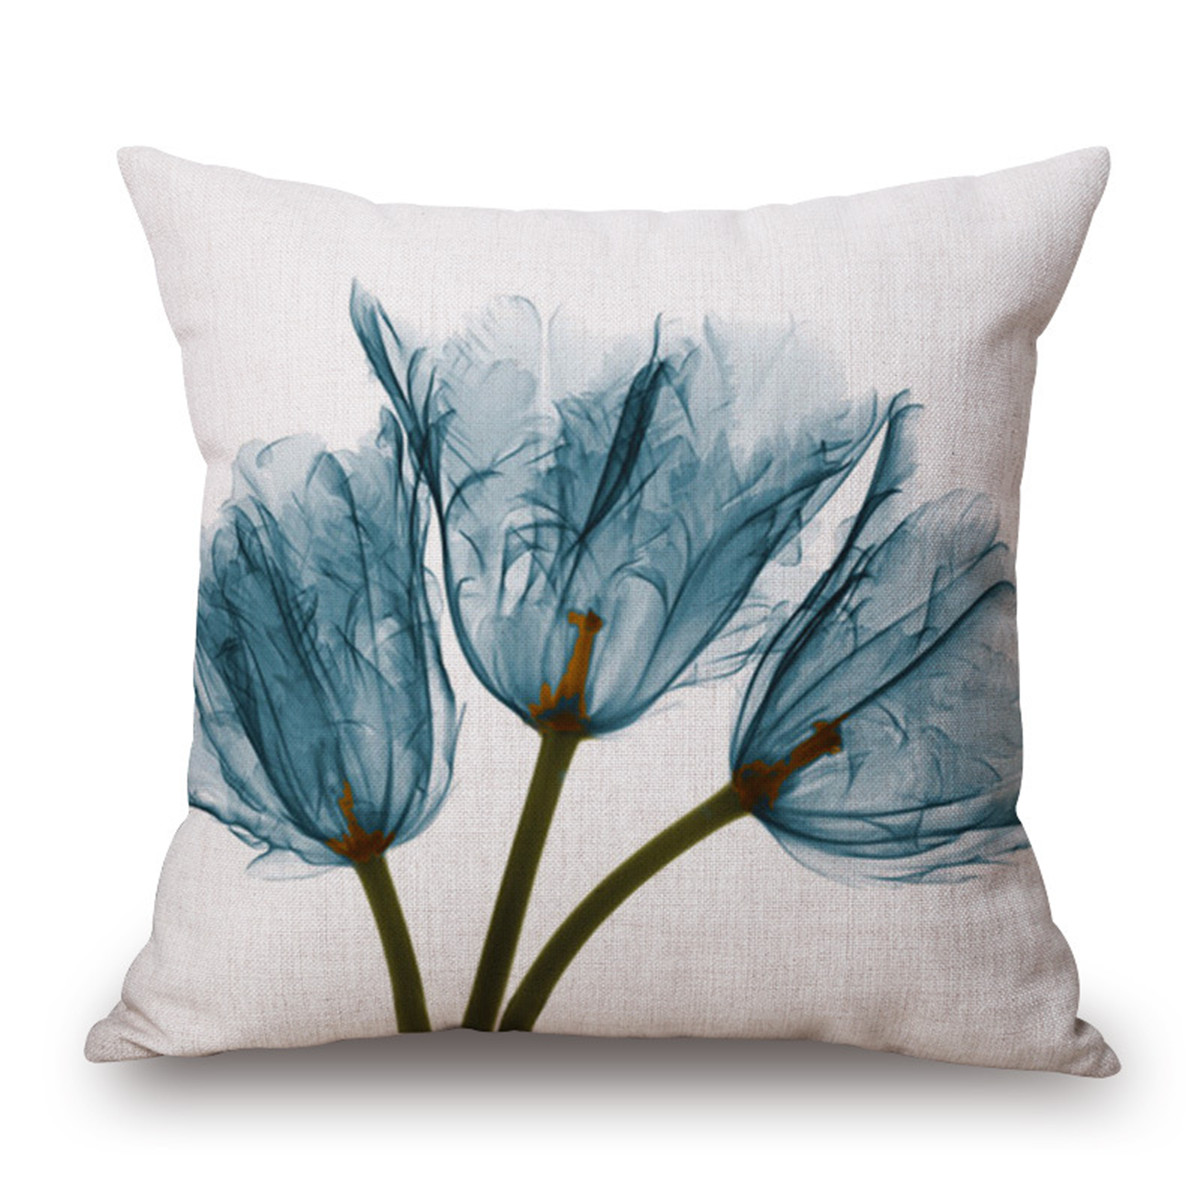 Ink-Painting-Flowers-Cotton-Linen-Pillow-Case-Tulips-Sofa-Cushion-Cover-45x45cm-1161674-7